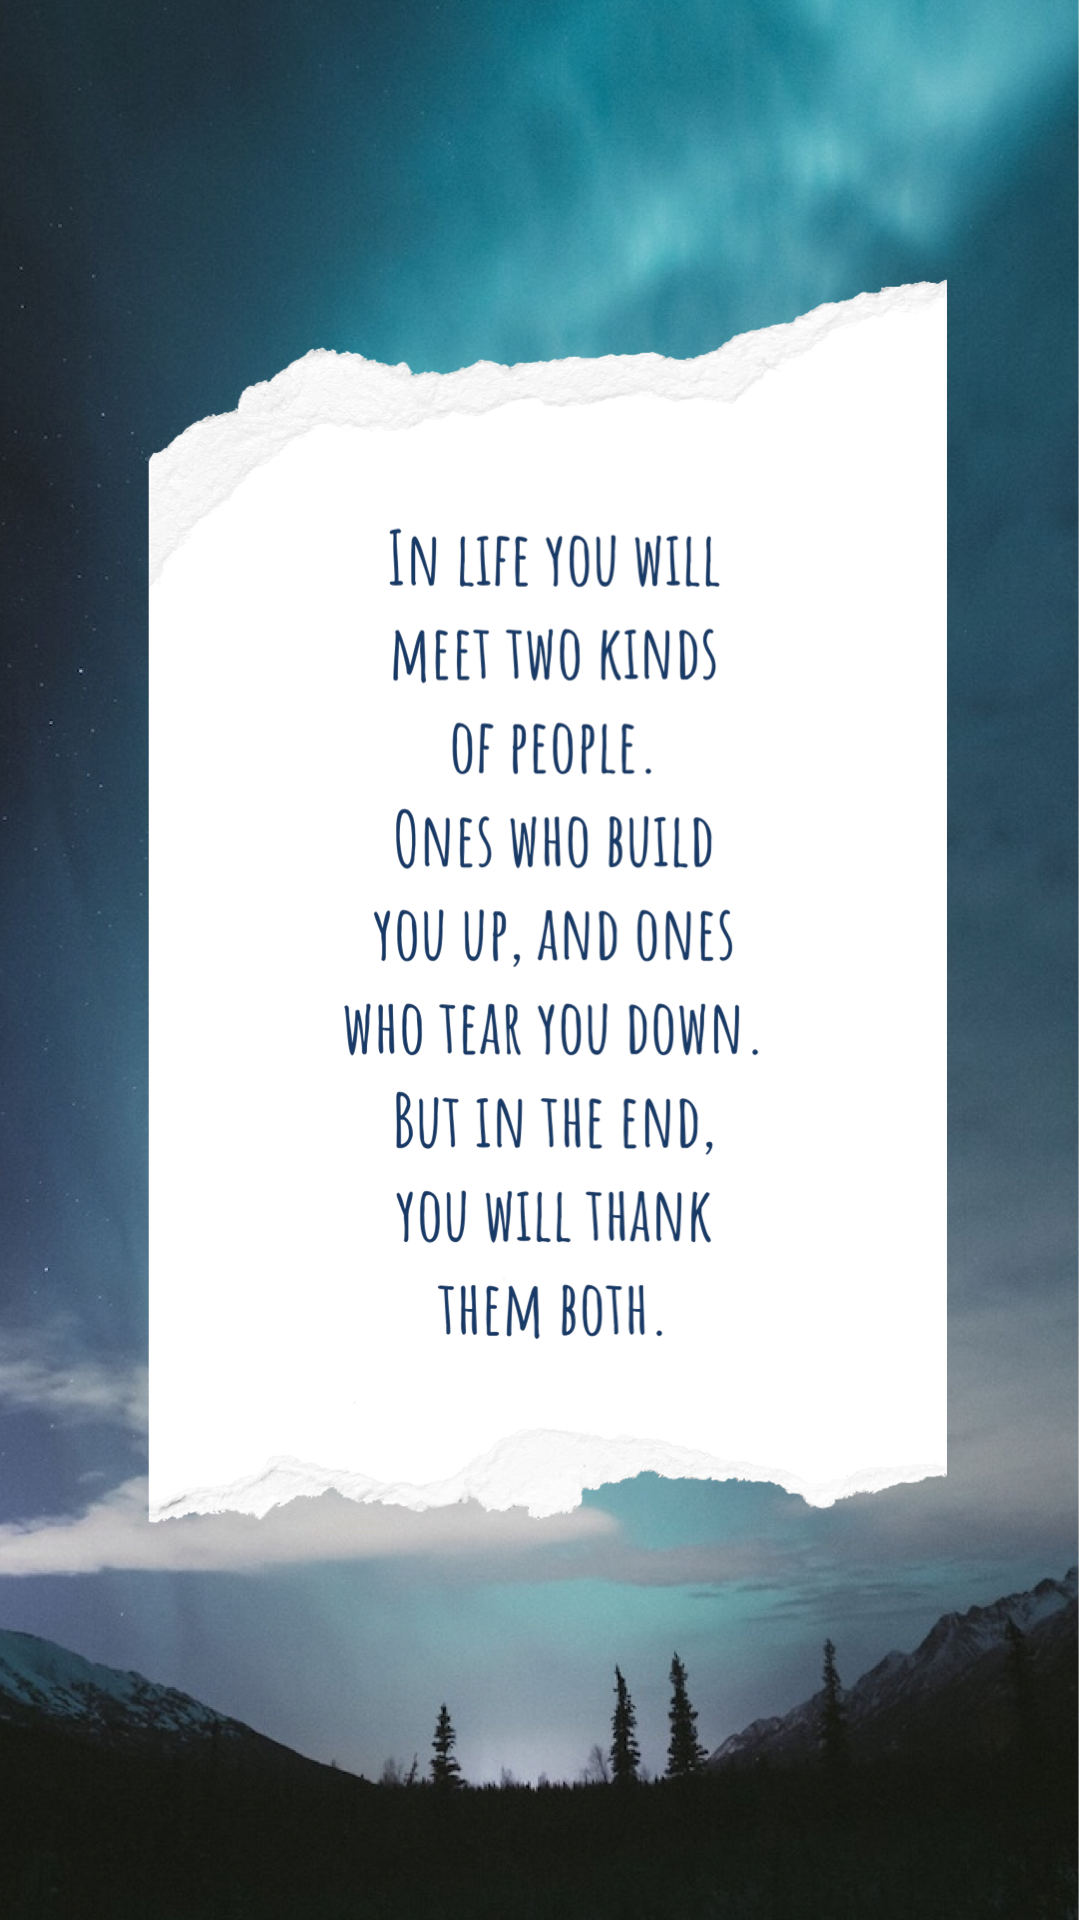 A Picture With A Quote On It That Says In Life You Will Meet Two Kinds Torn Paper Template